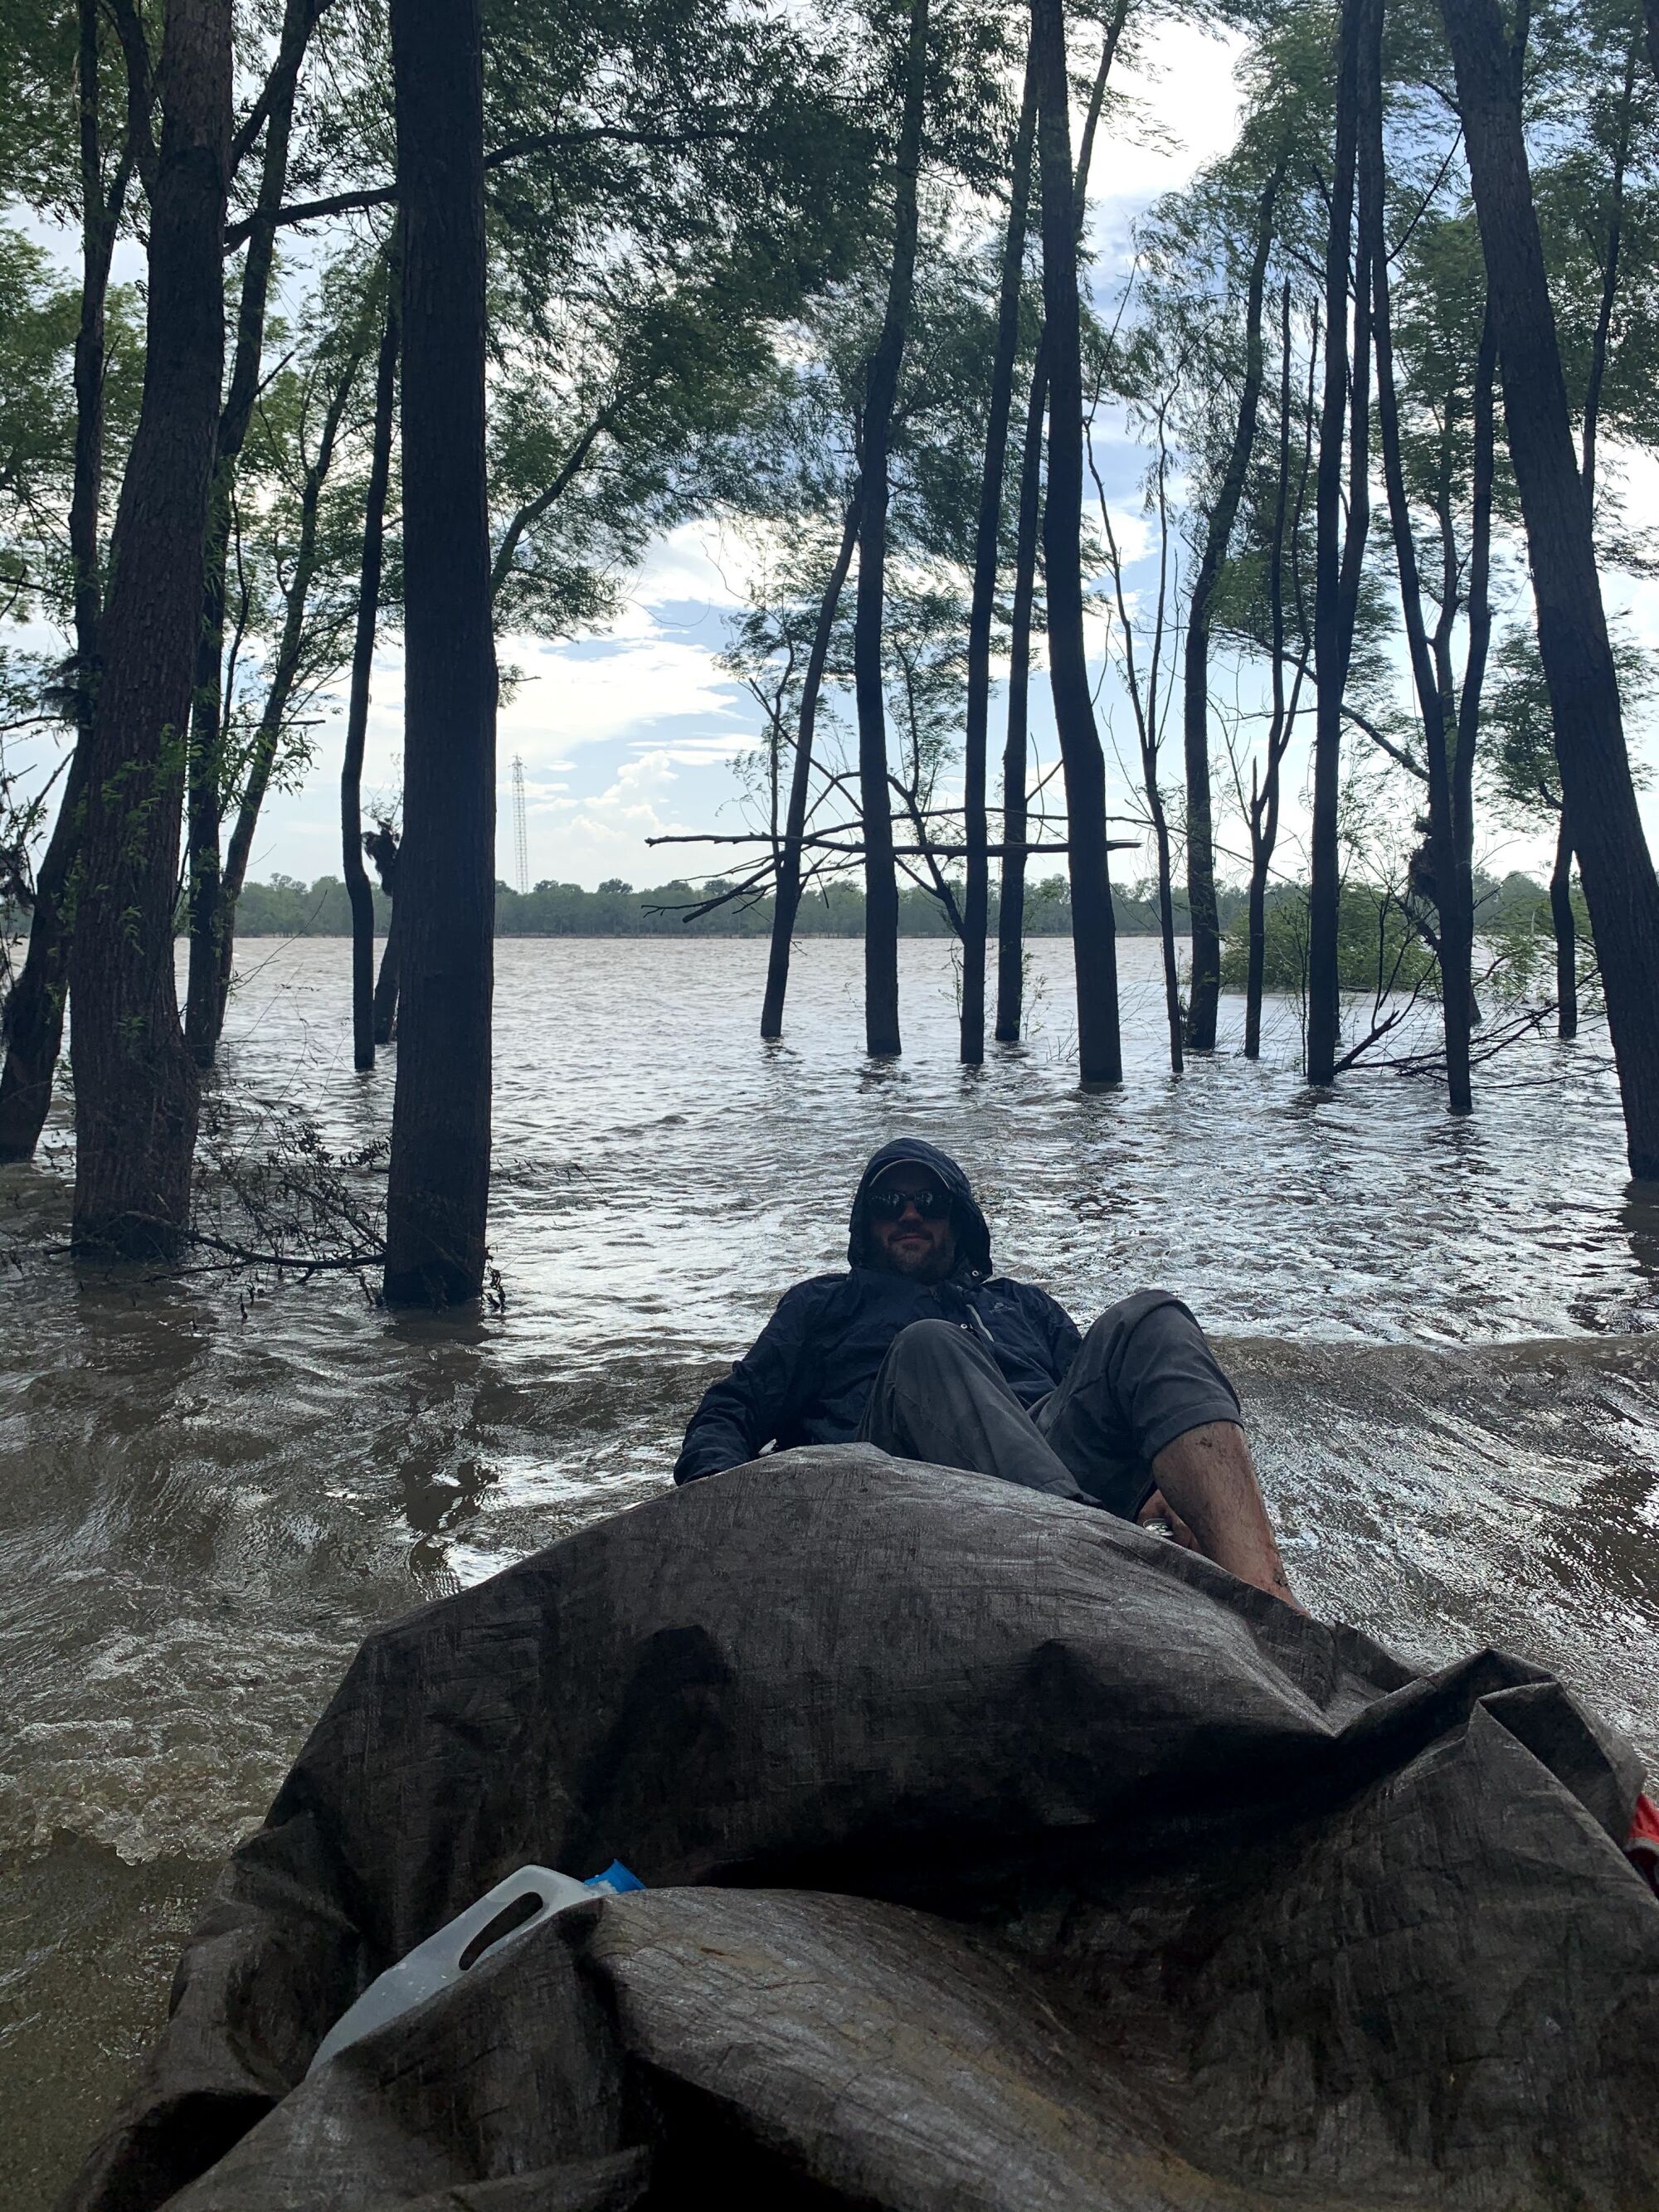 Connor Sheets tries to avoid getting wet in a beached canoe on the banks of the Mississippi River 